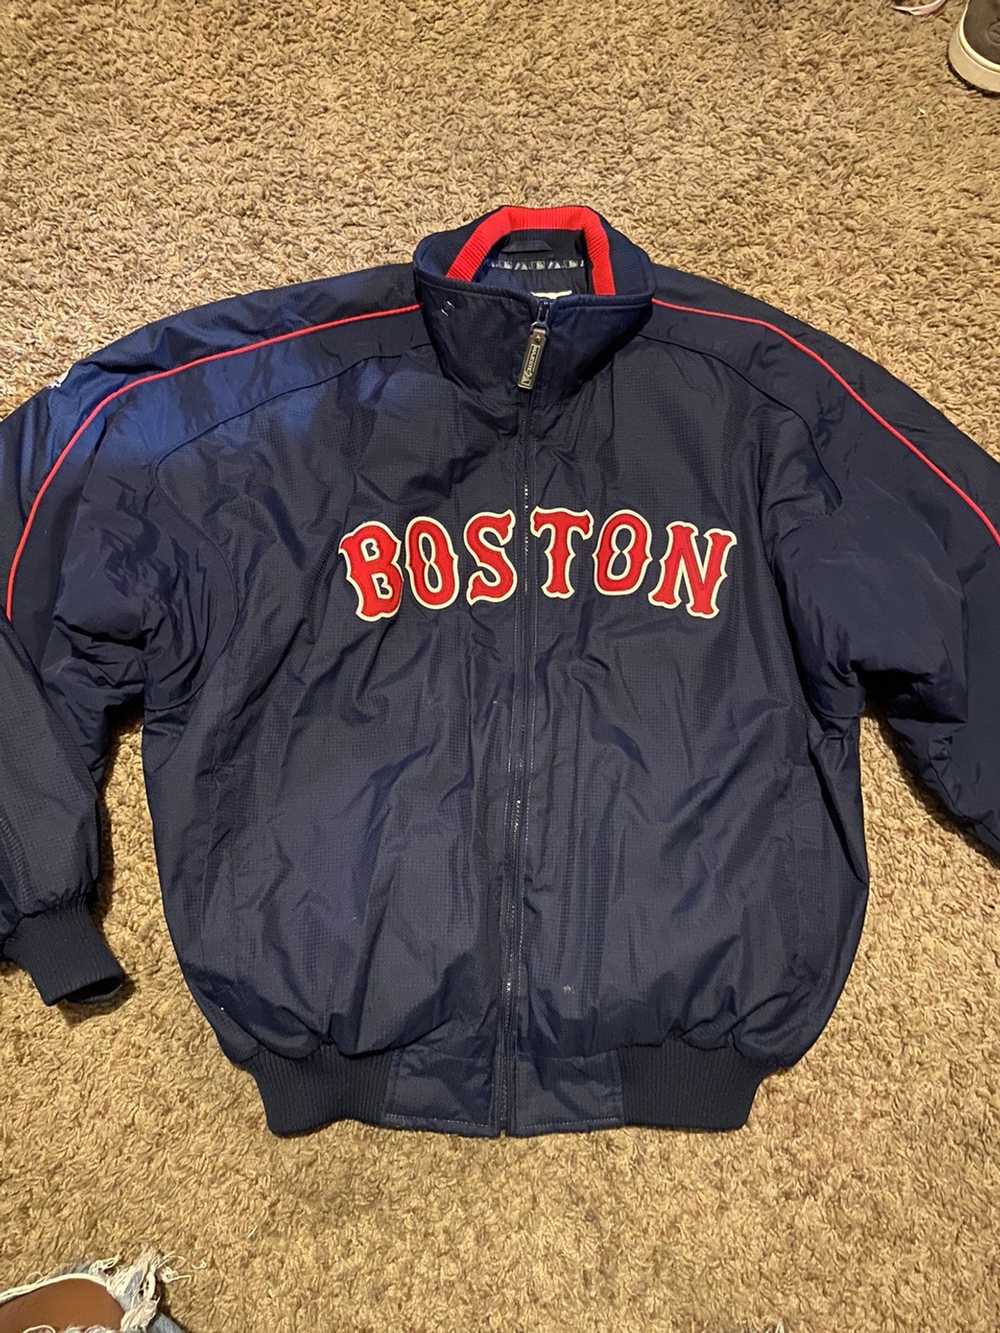 MLB Boston red Sox Majestic kids hoodie-vest (youth small 8y) therma base